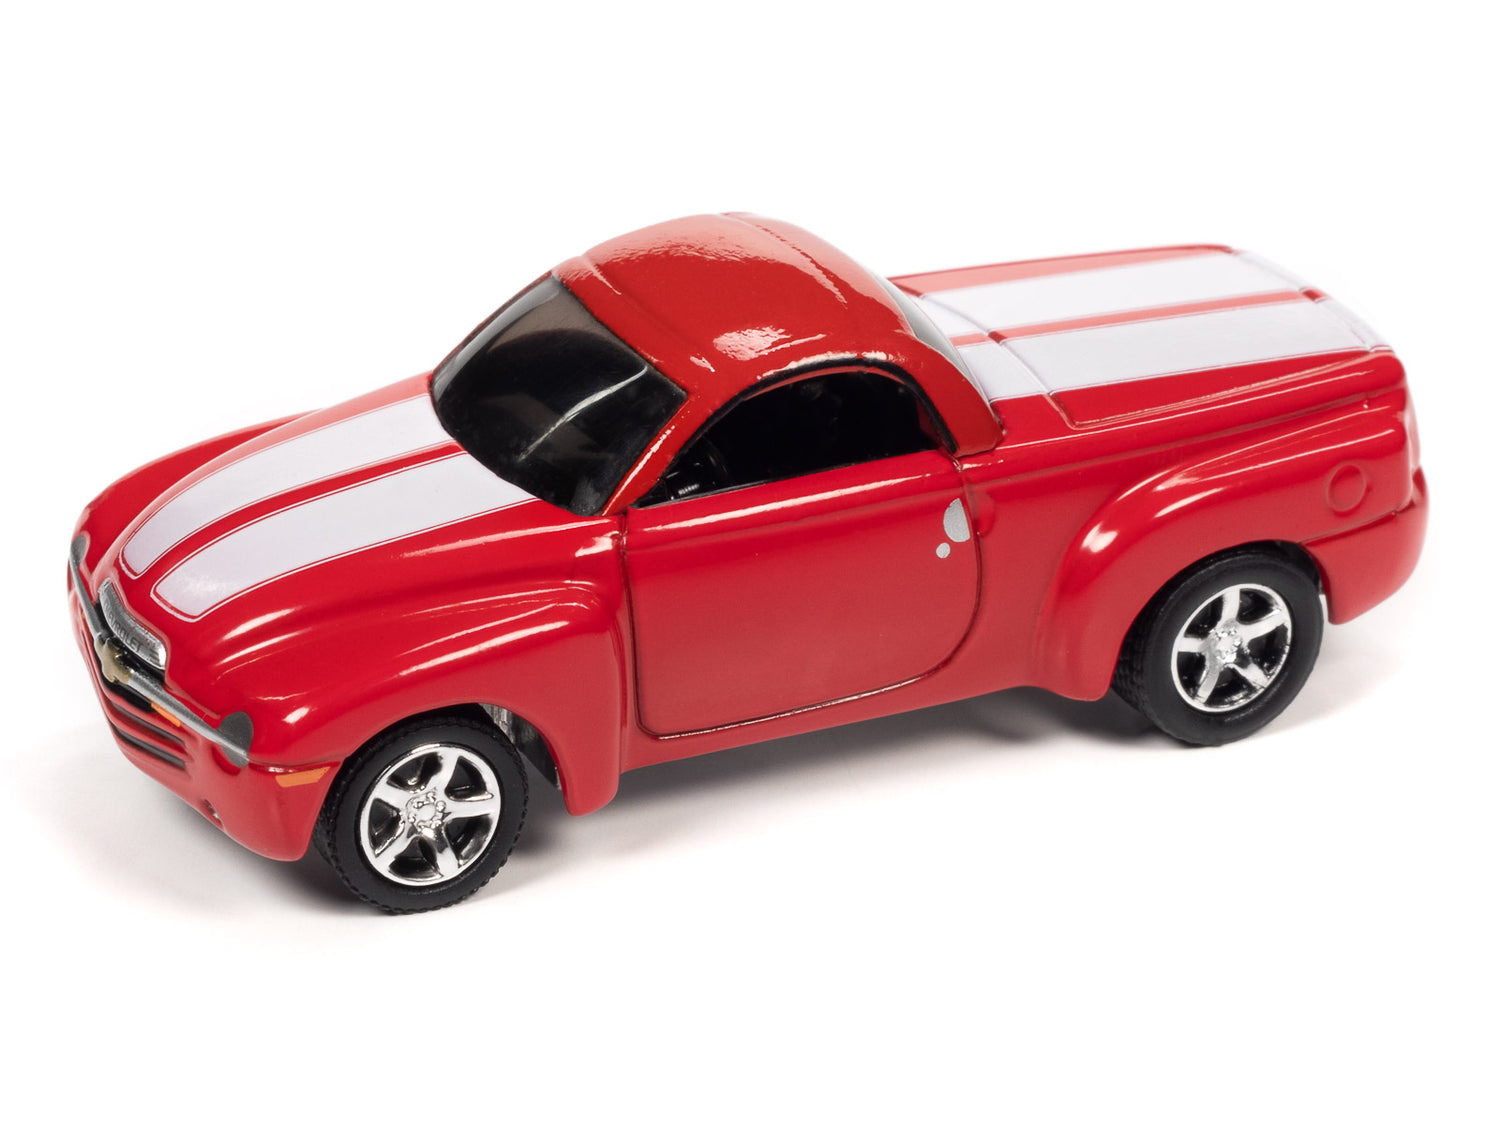 Johnny Lightning Classic Gold 2005 Chevrolet SSR (Torch Red w/White SS Stripes) 1:64 Scale Diecast